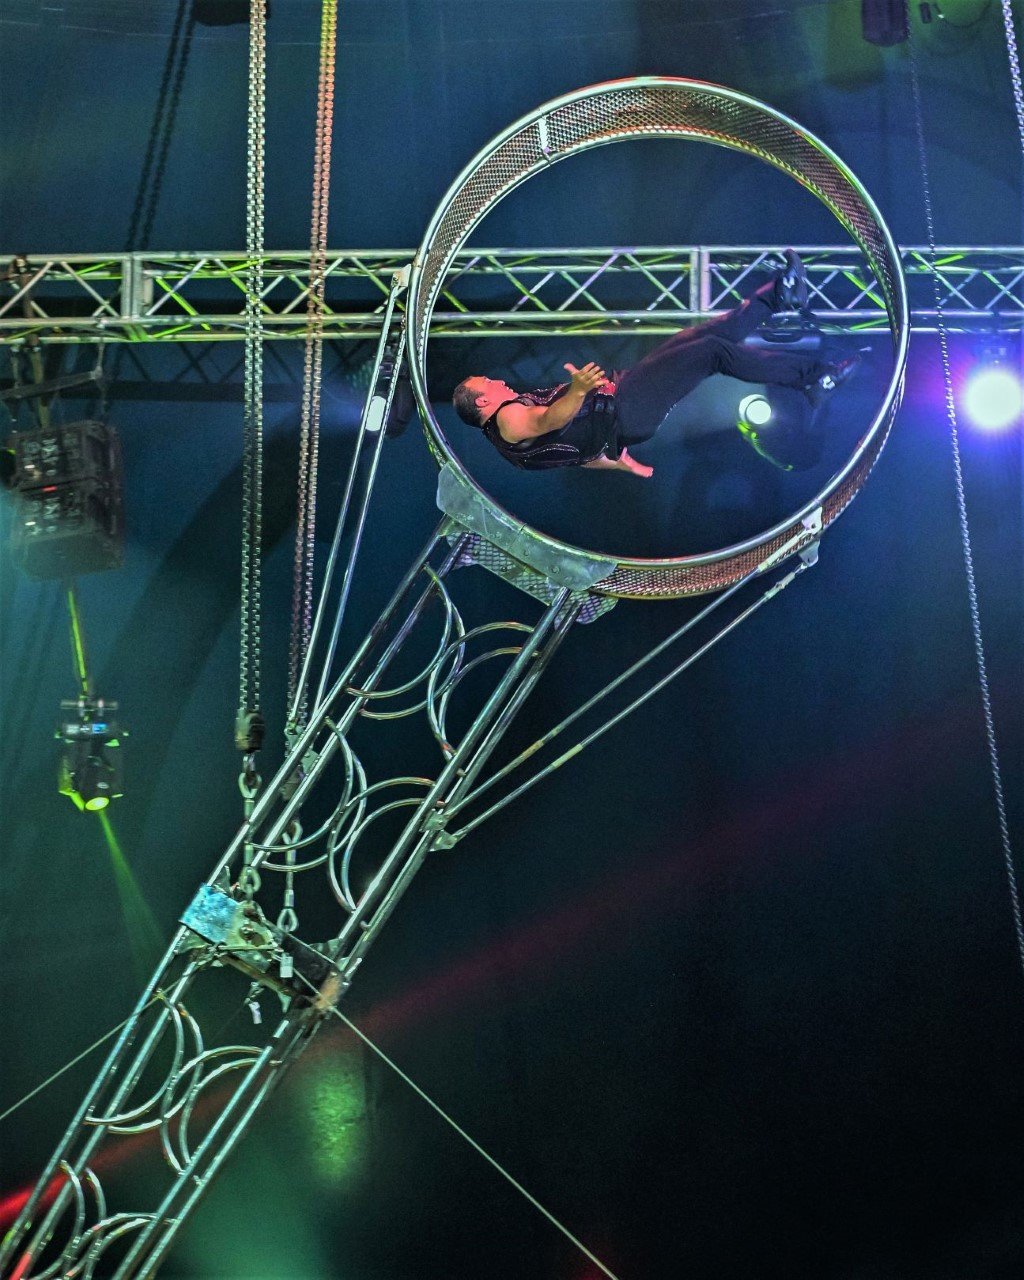 A gravity-defying performer puts on a show at Cirque Italia.